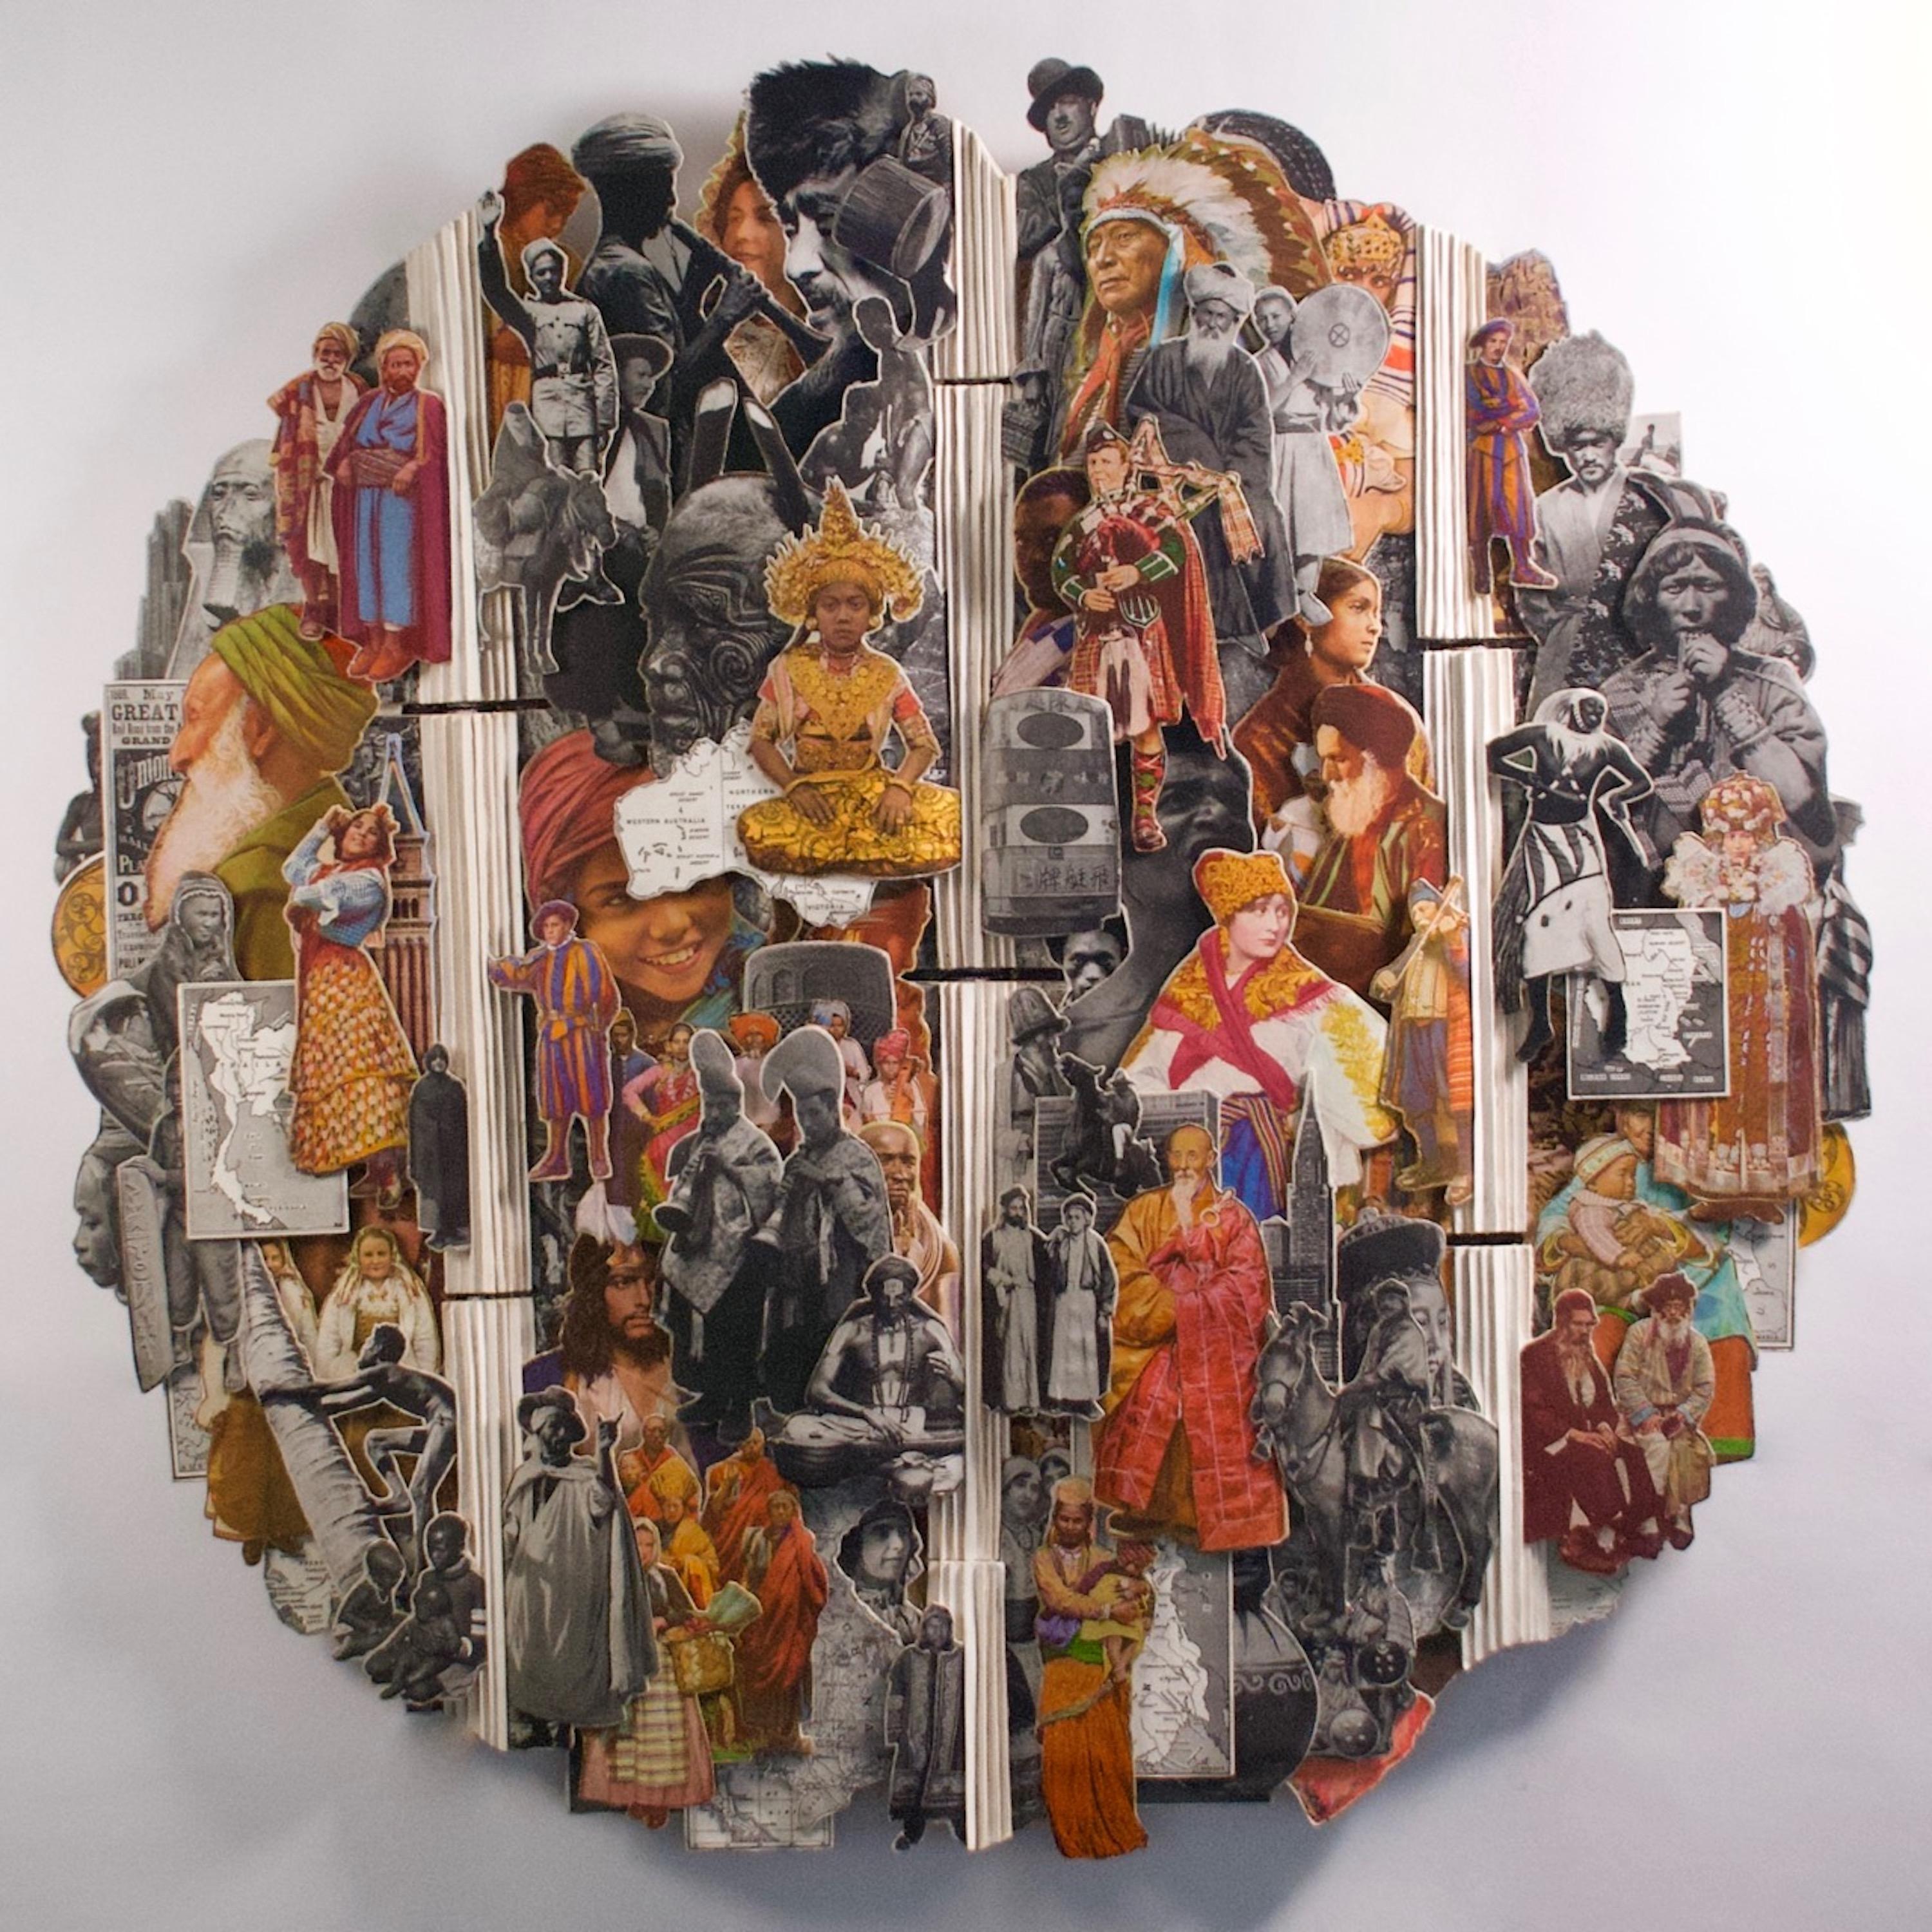 "Around the World" -- Collage Wall Sculpture by Tony Dagradi